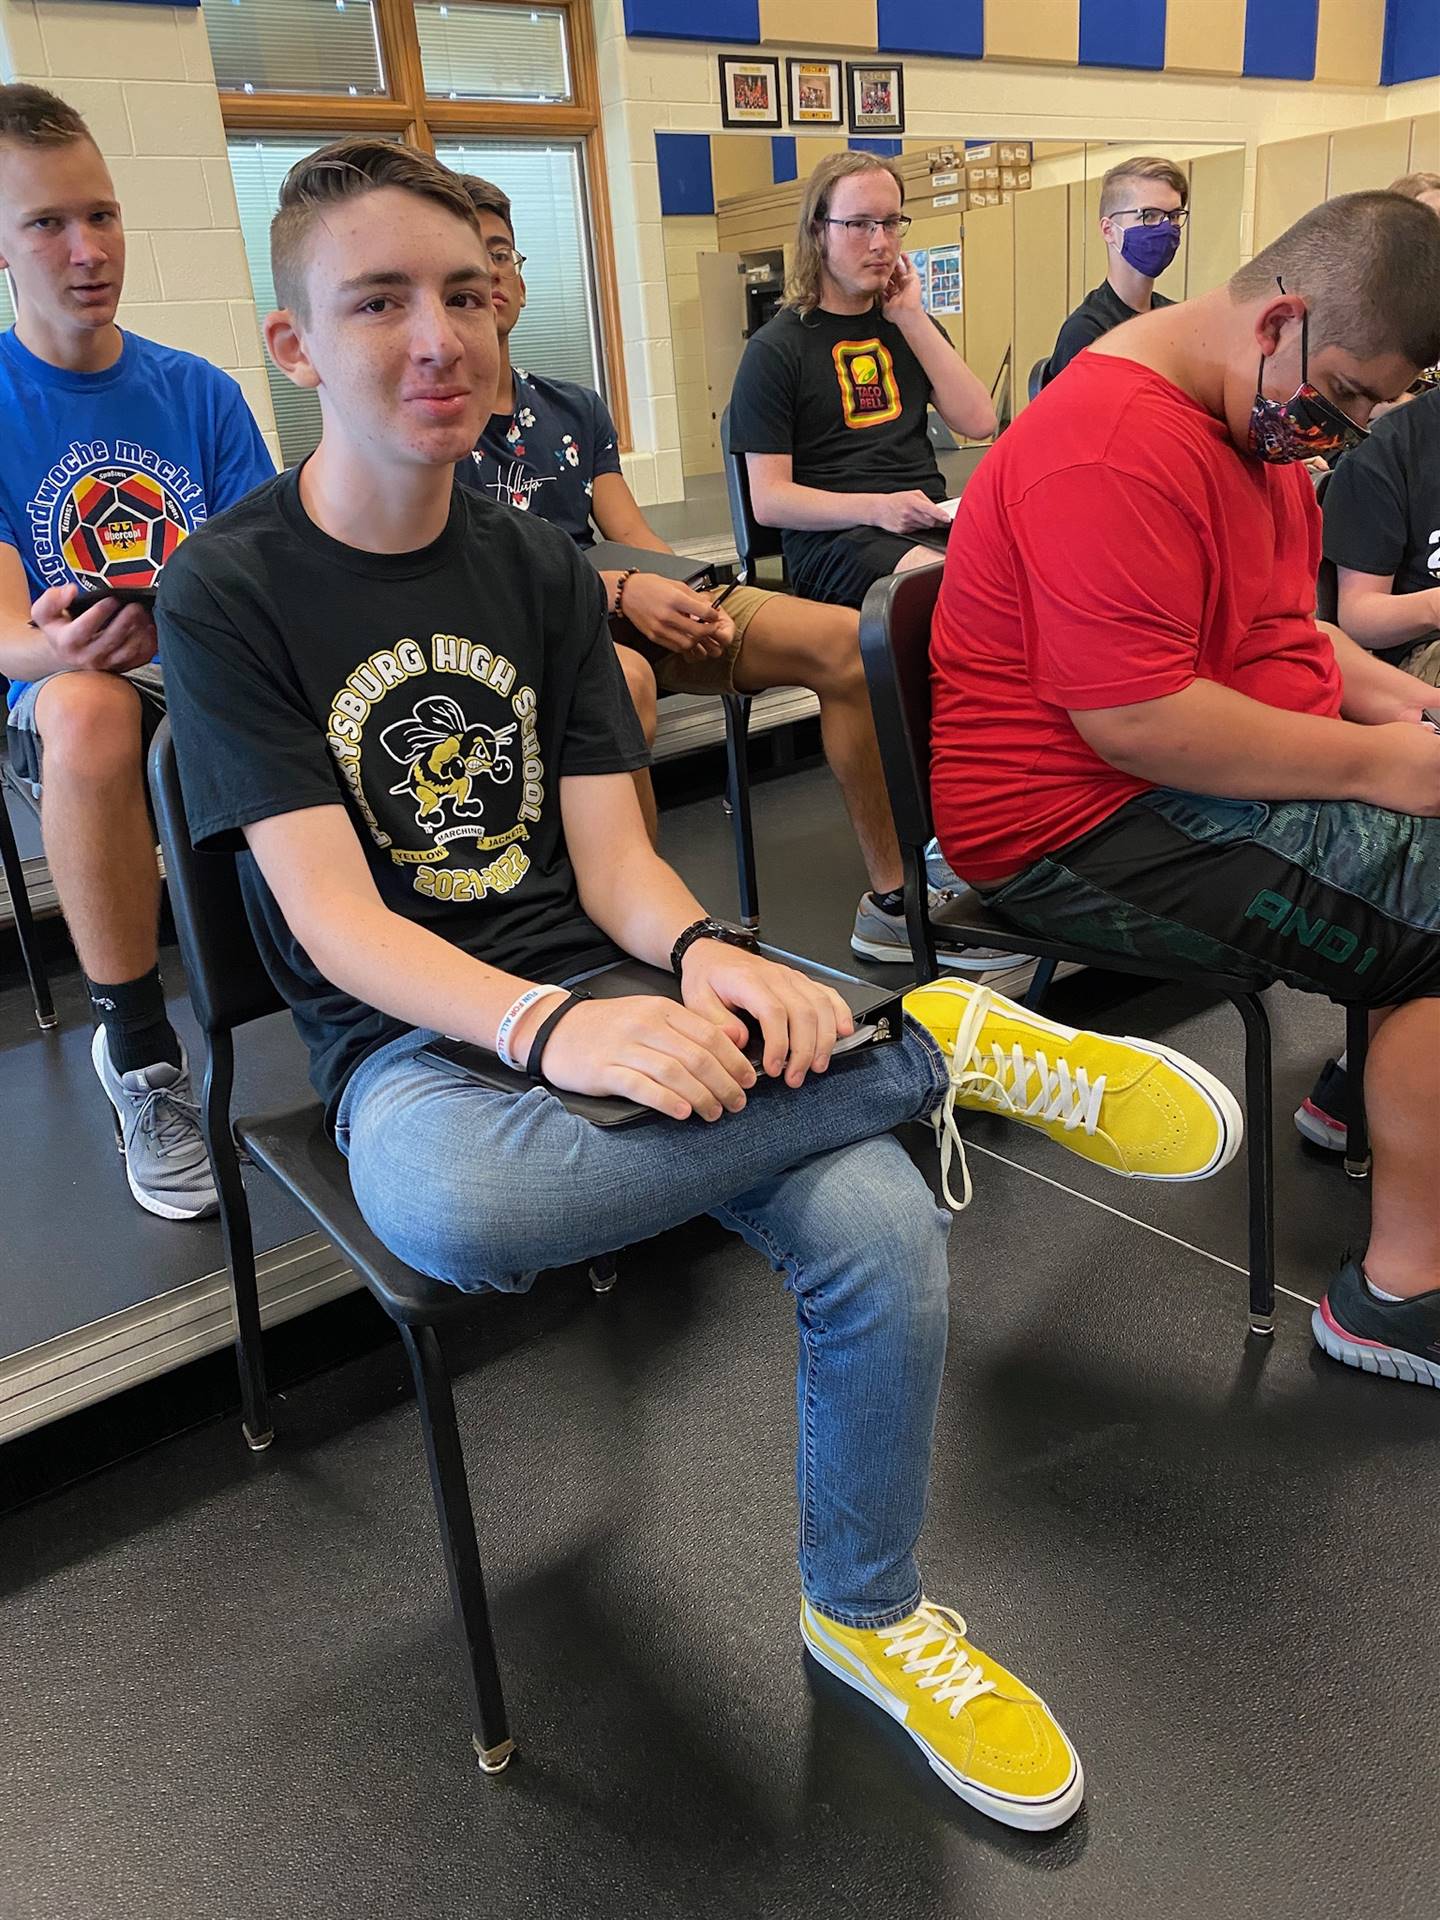 Chorale member, Ethan Vandenynde, sporting some cool yellow sneakers